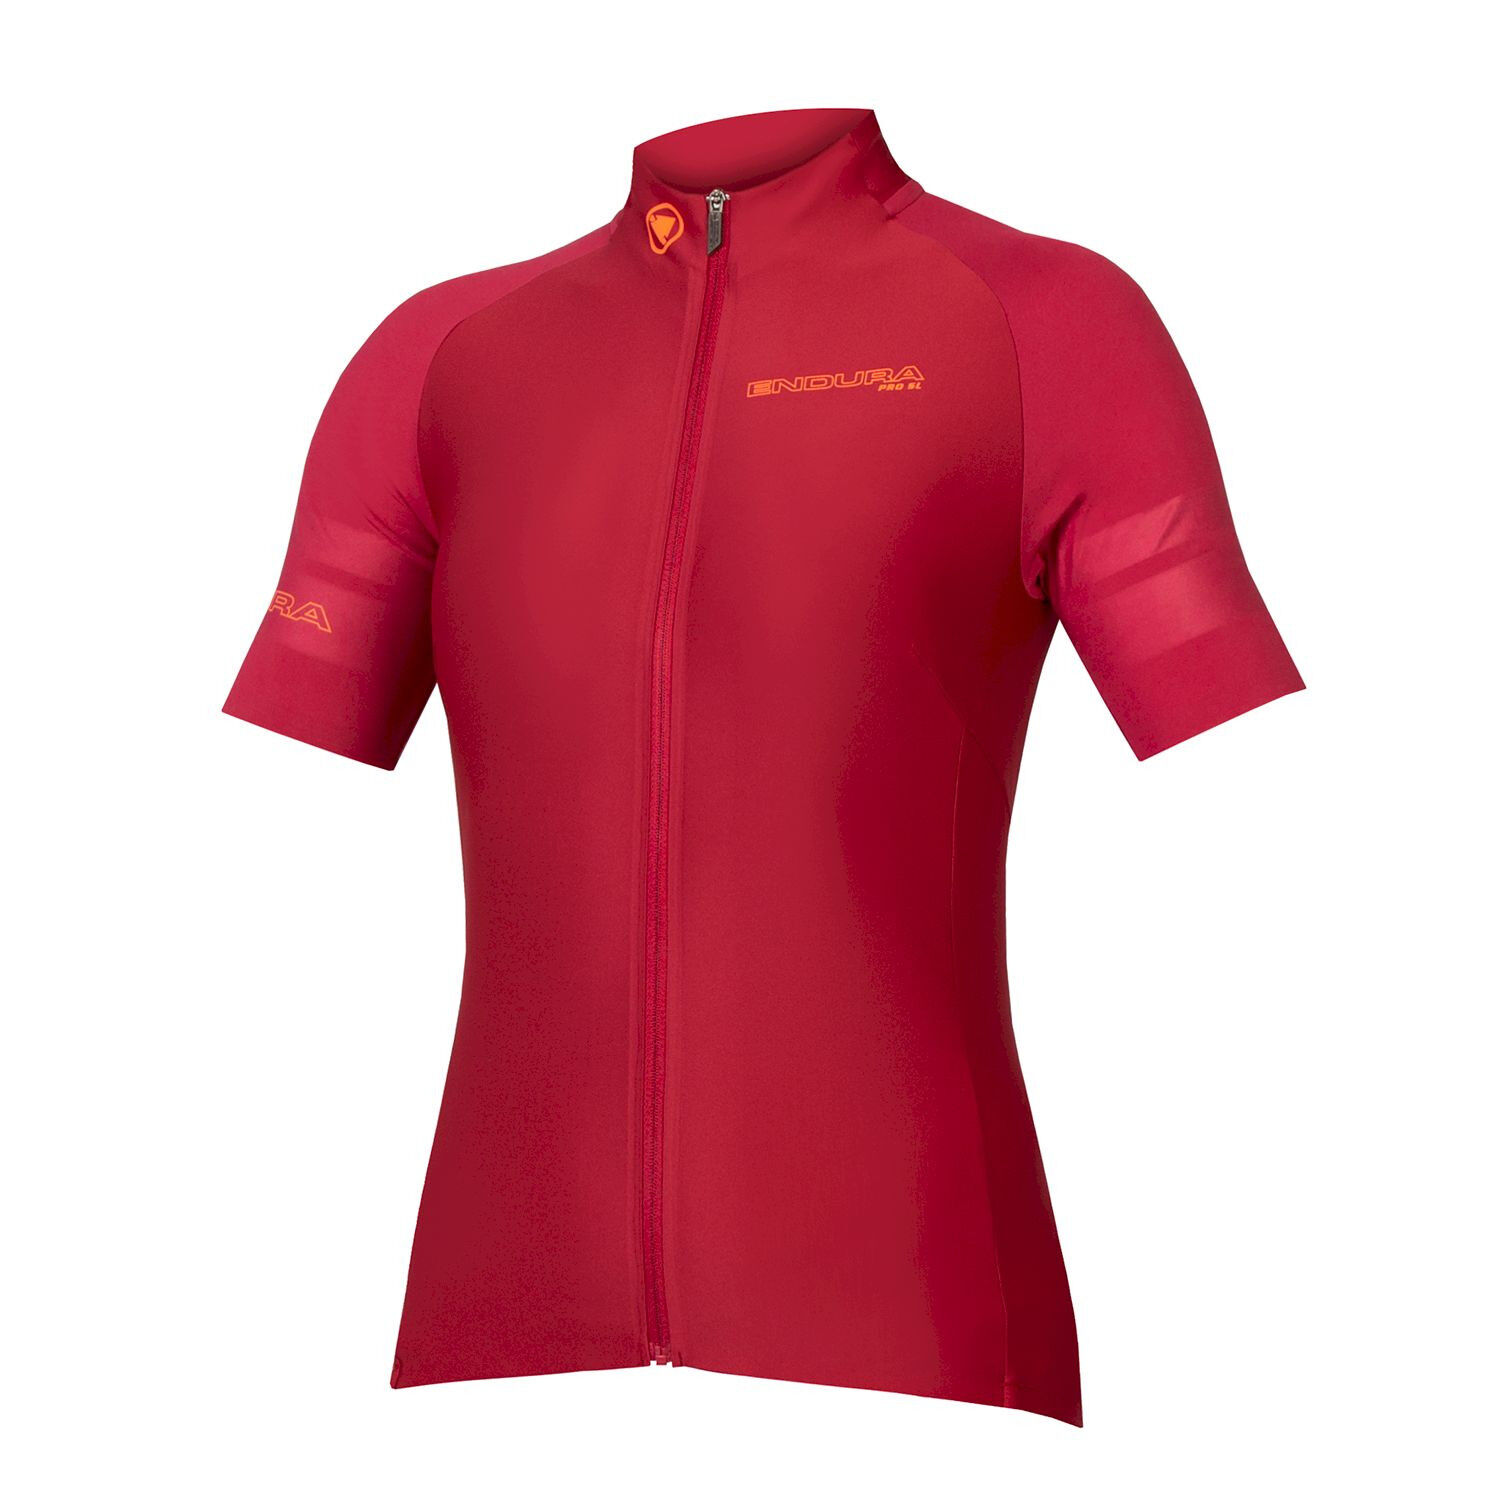 Endura Pro SL S/S Jersey II - Maillot ciclismo - Mujer